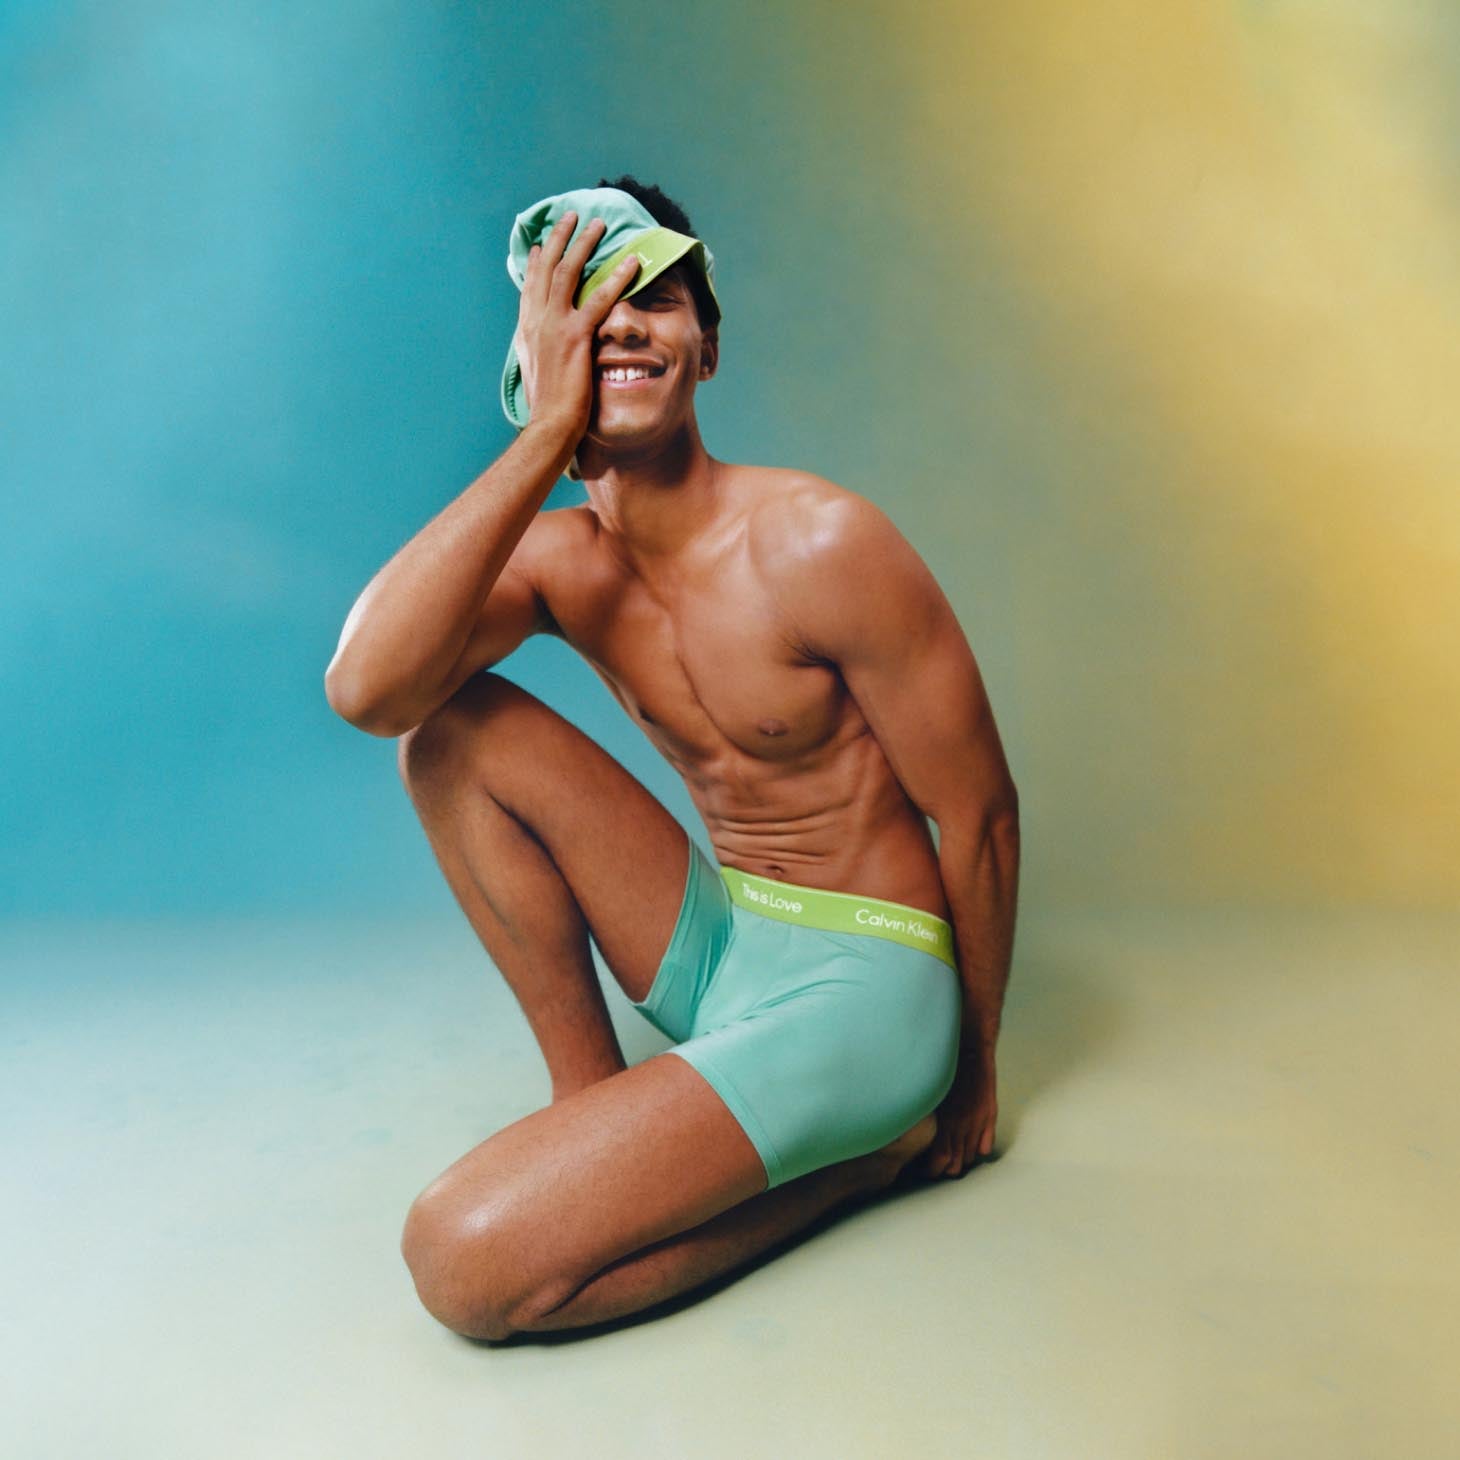 Man kneeling on the ground wearing light green underwear trunks and holding a pair of underwear over his eye